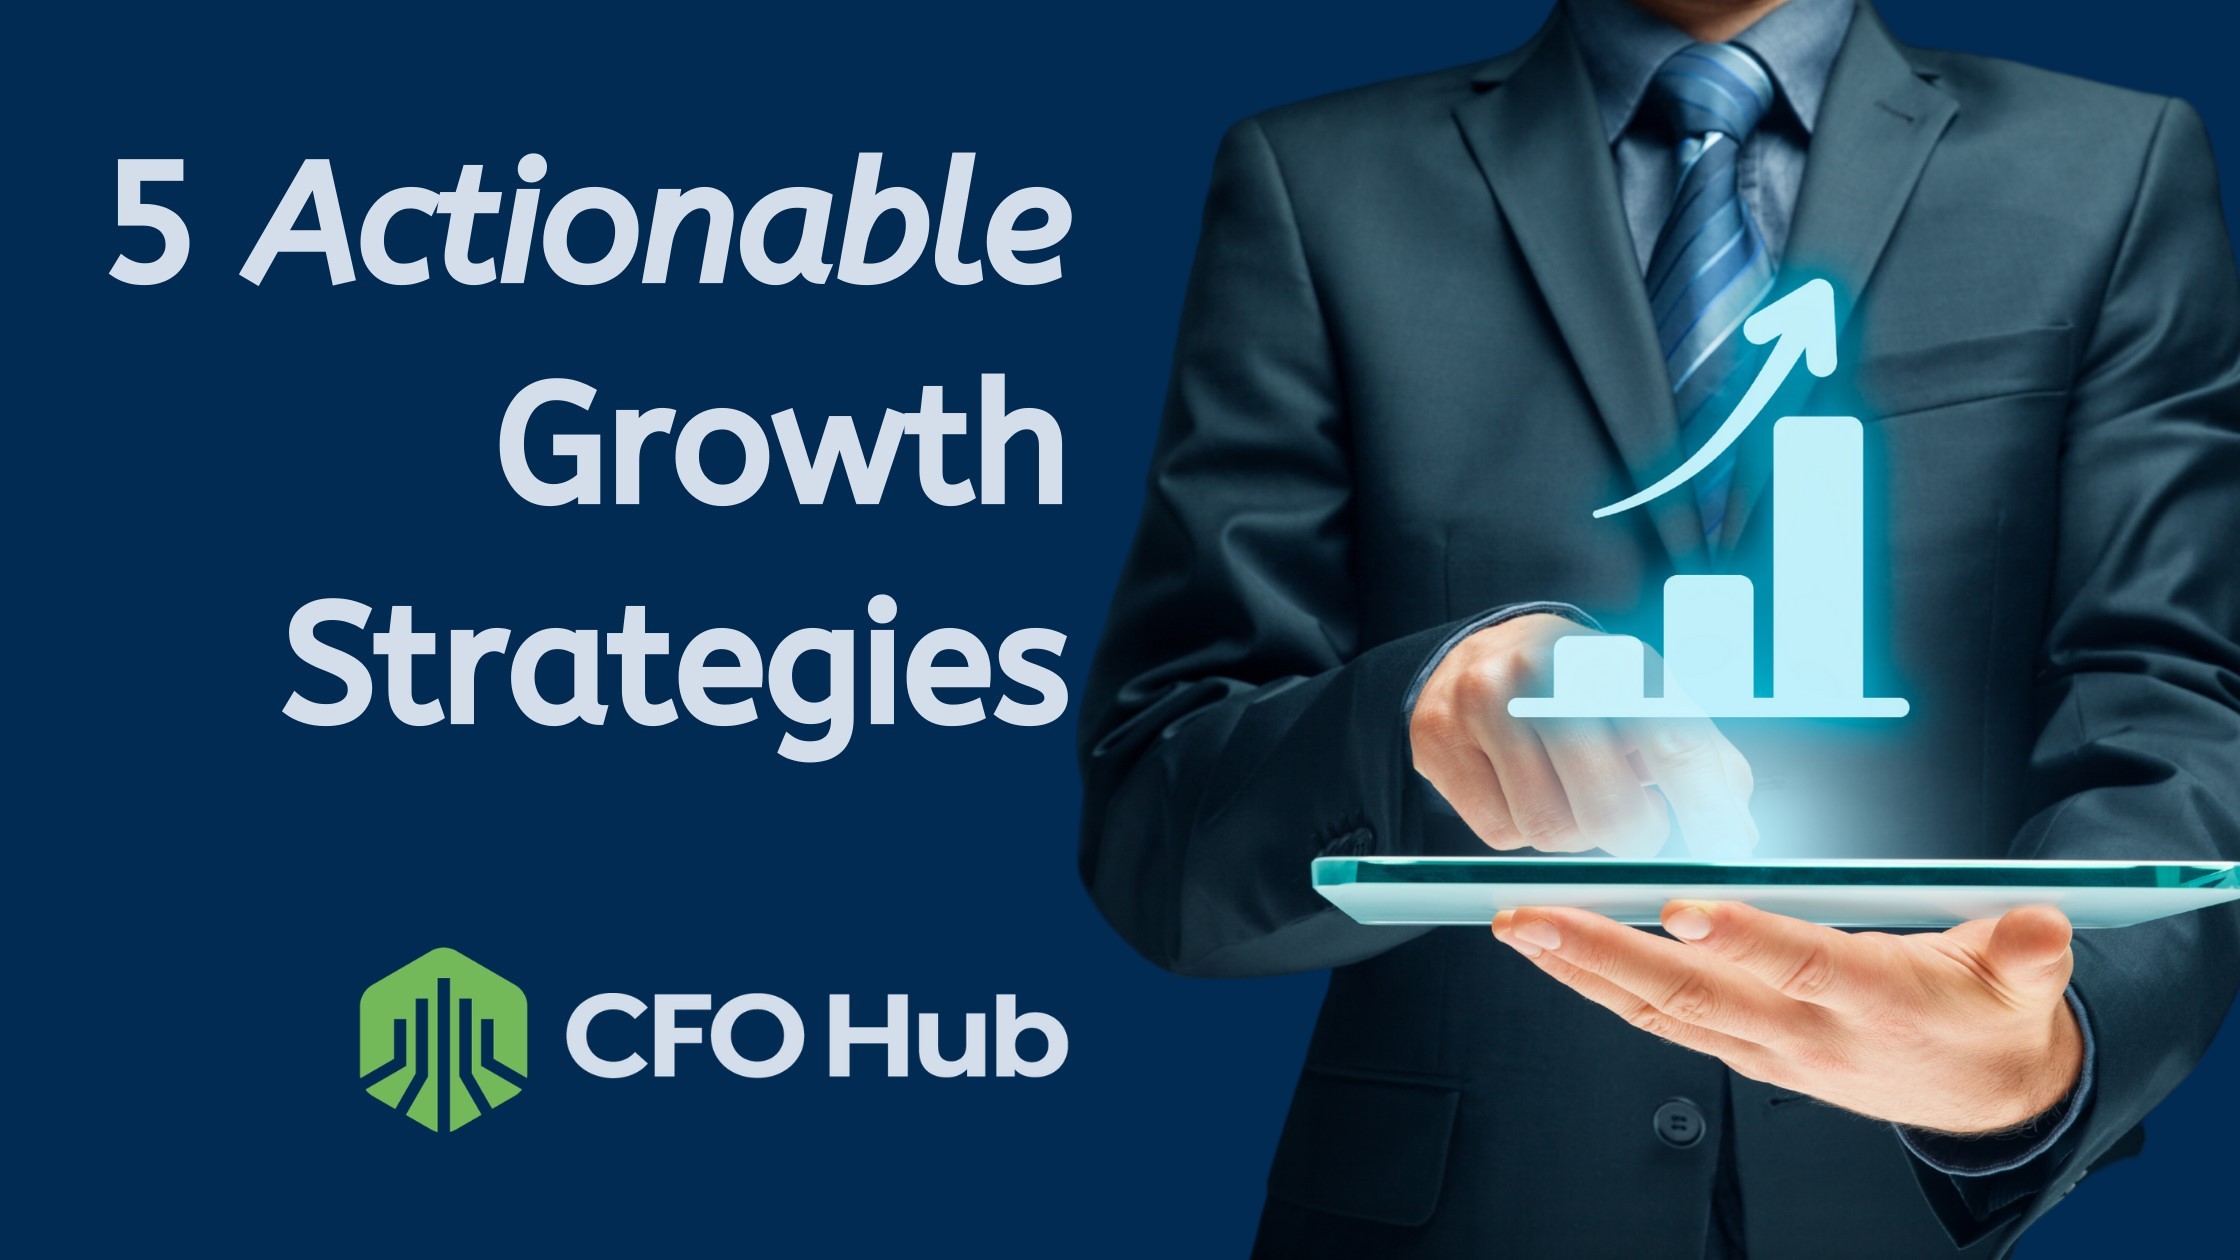 Actionable Growth Strategies